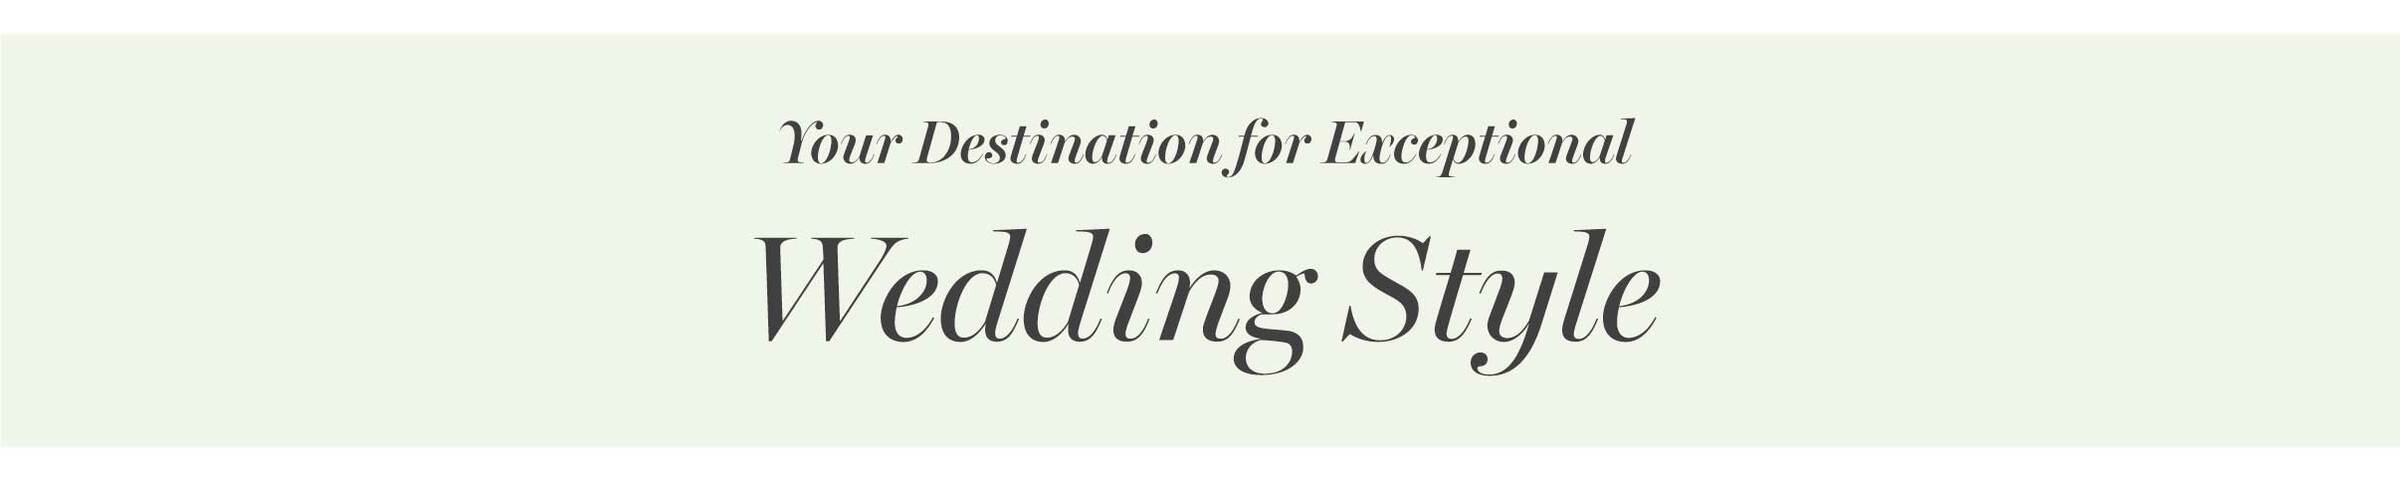 Your Destination for Exceptional Wedding Style